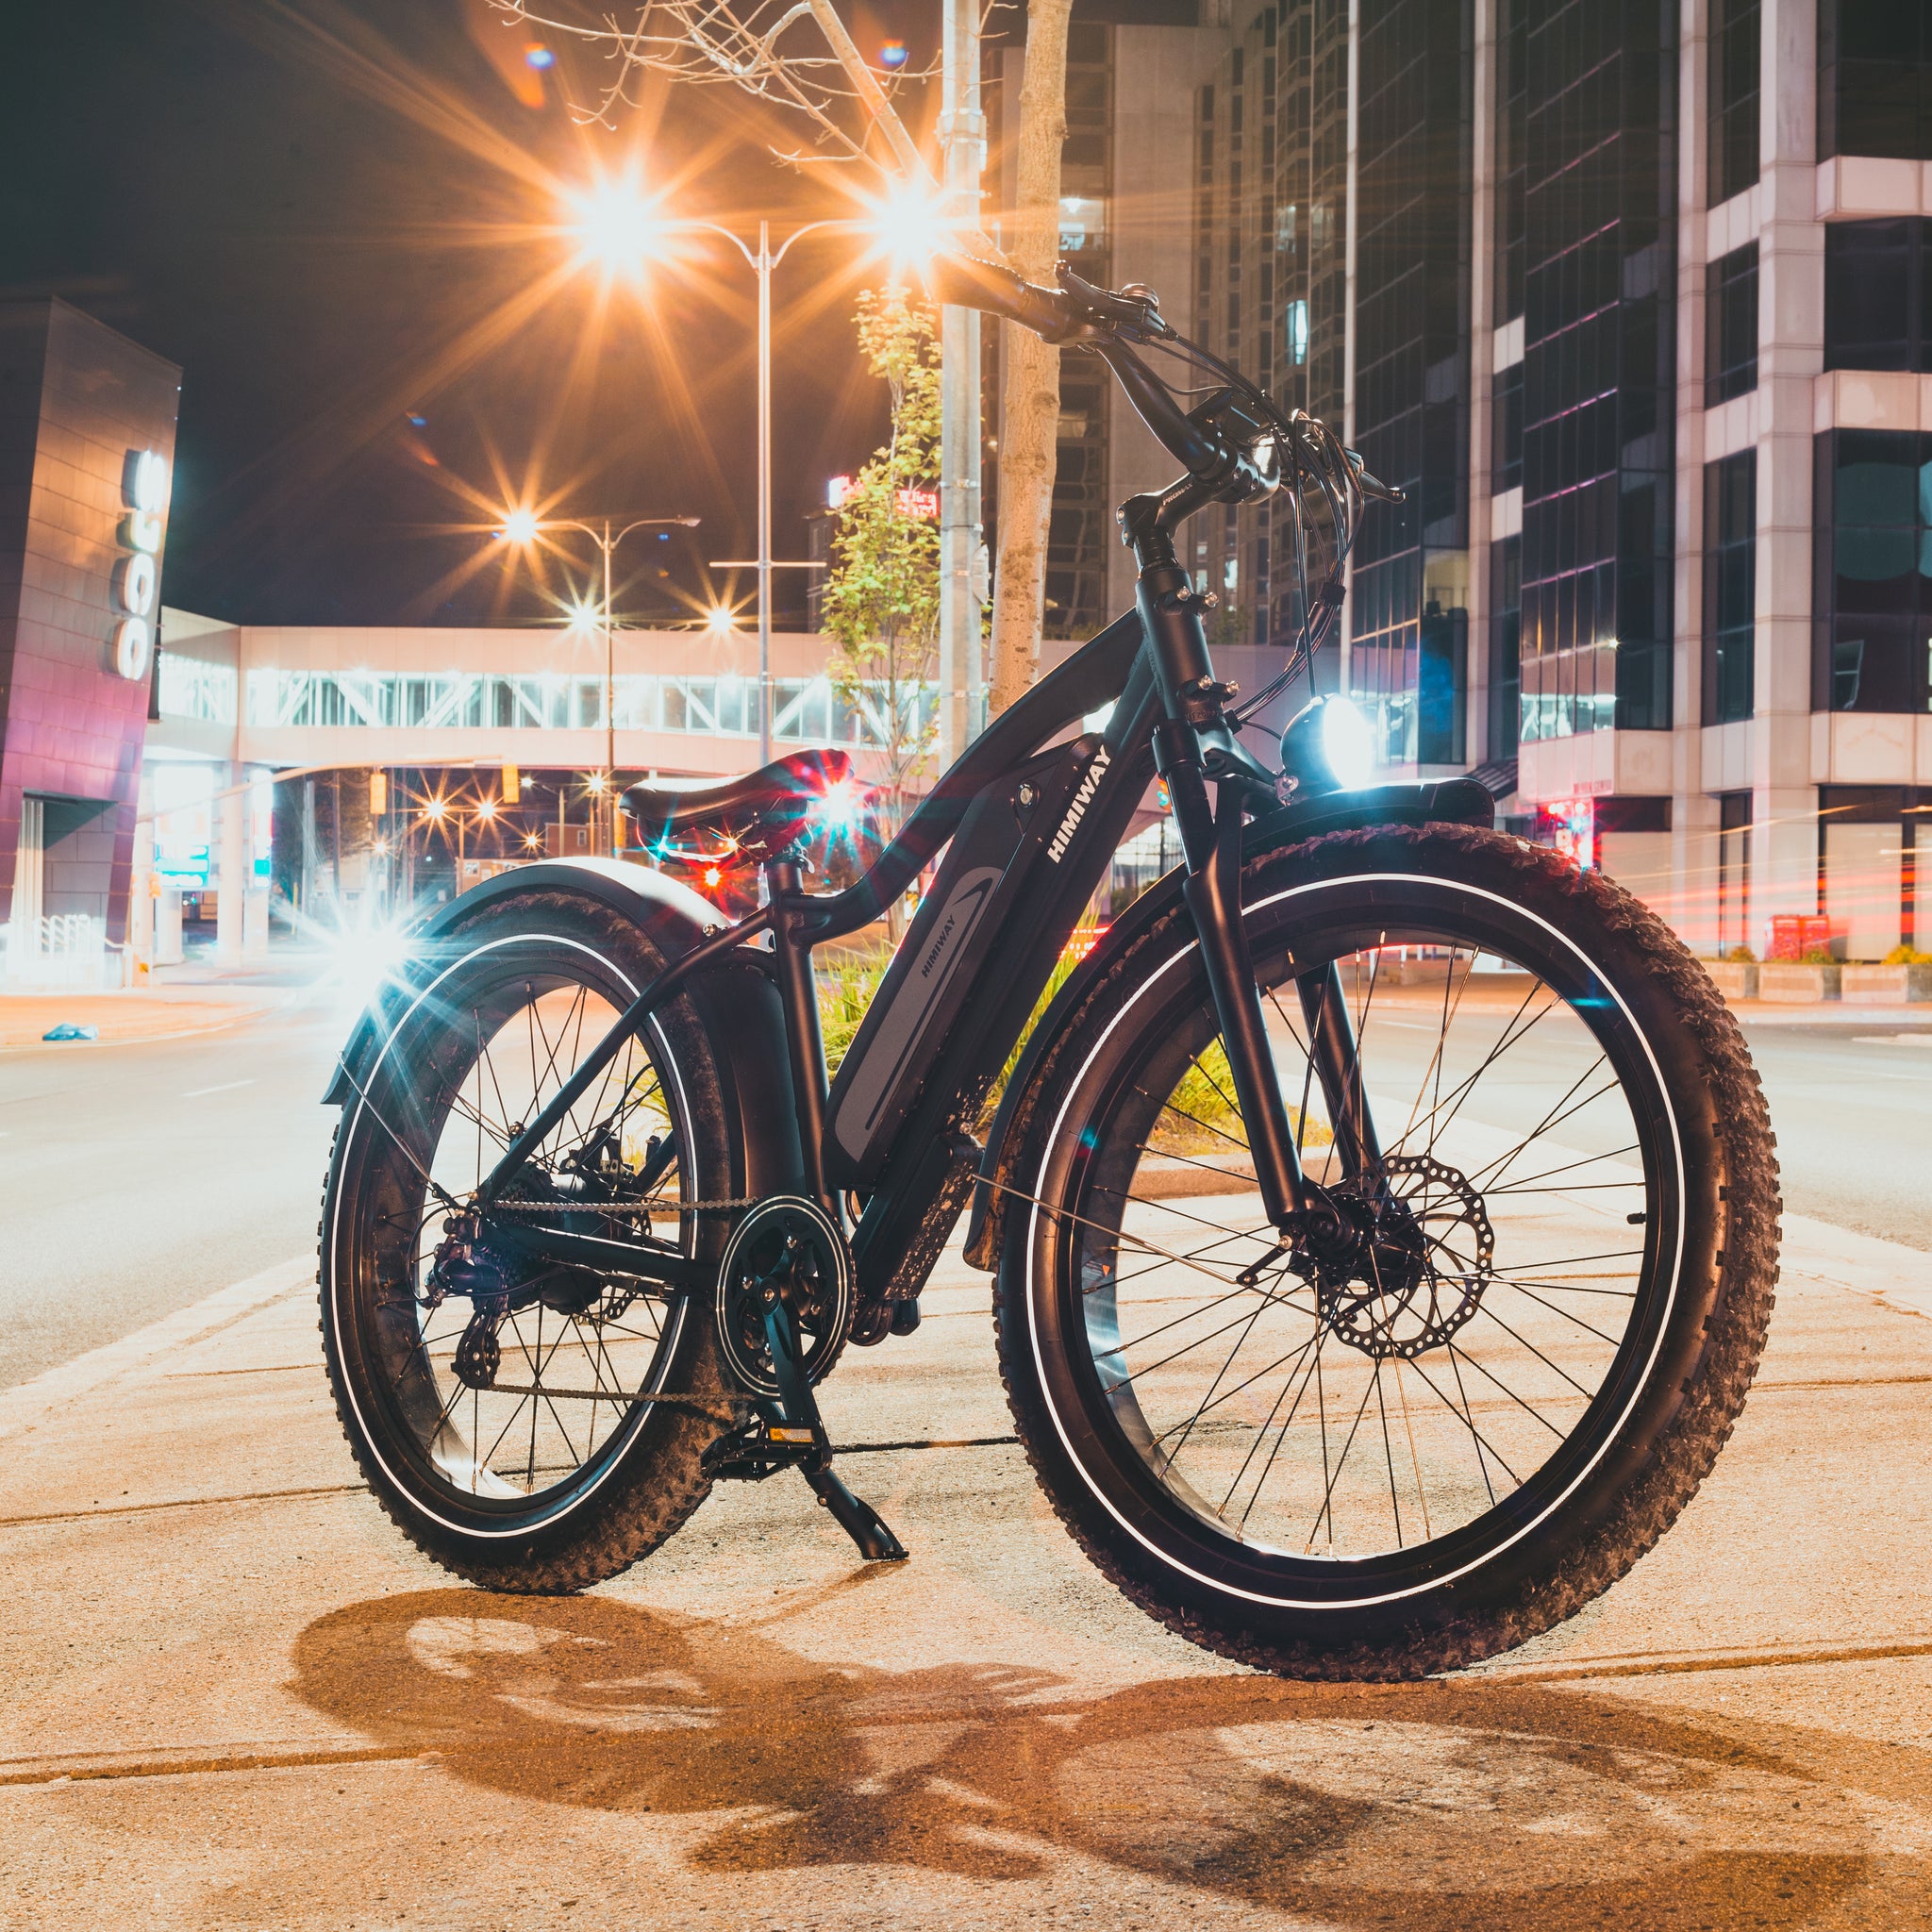 Himiway vs Rad Power vs Aventon: Who has the Best Deal for E-Bike Riders?